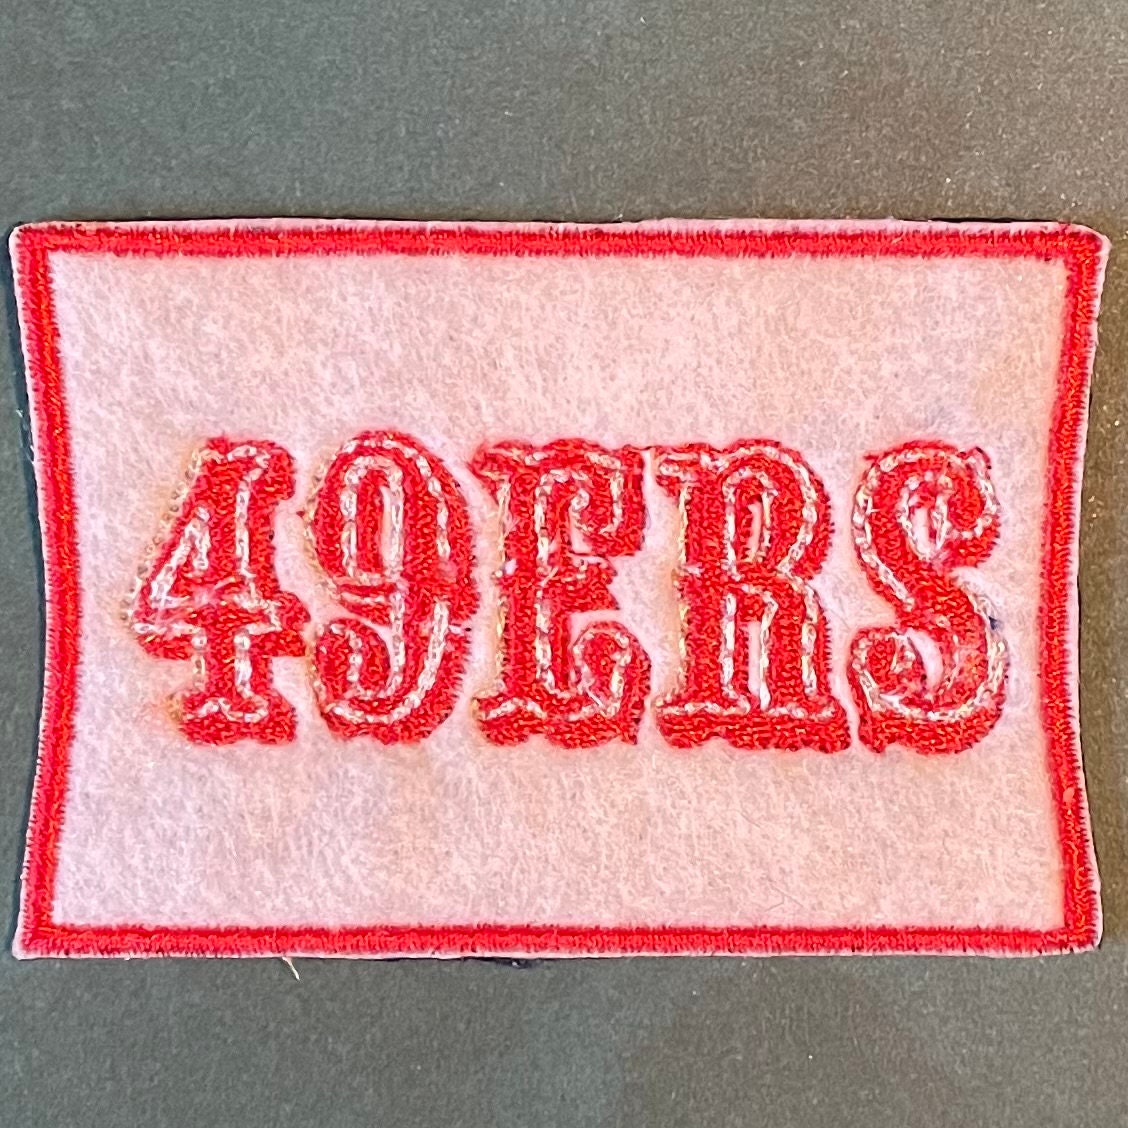  49ers Patch